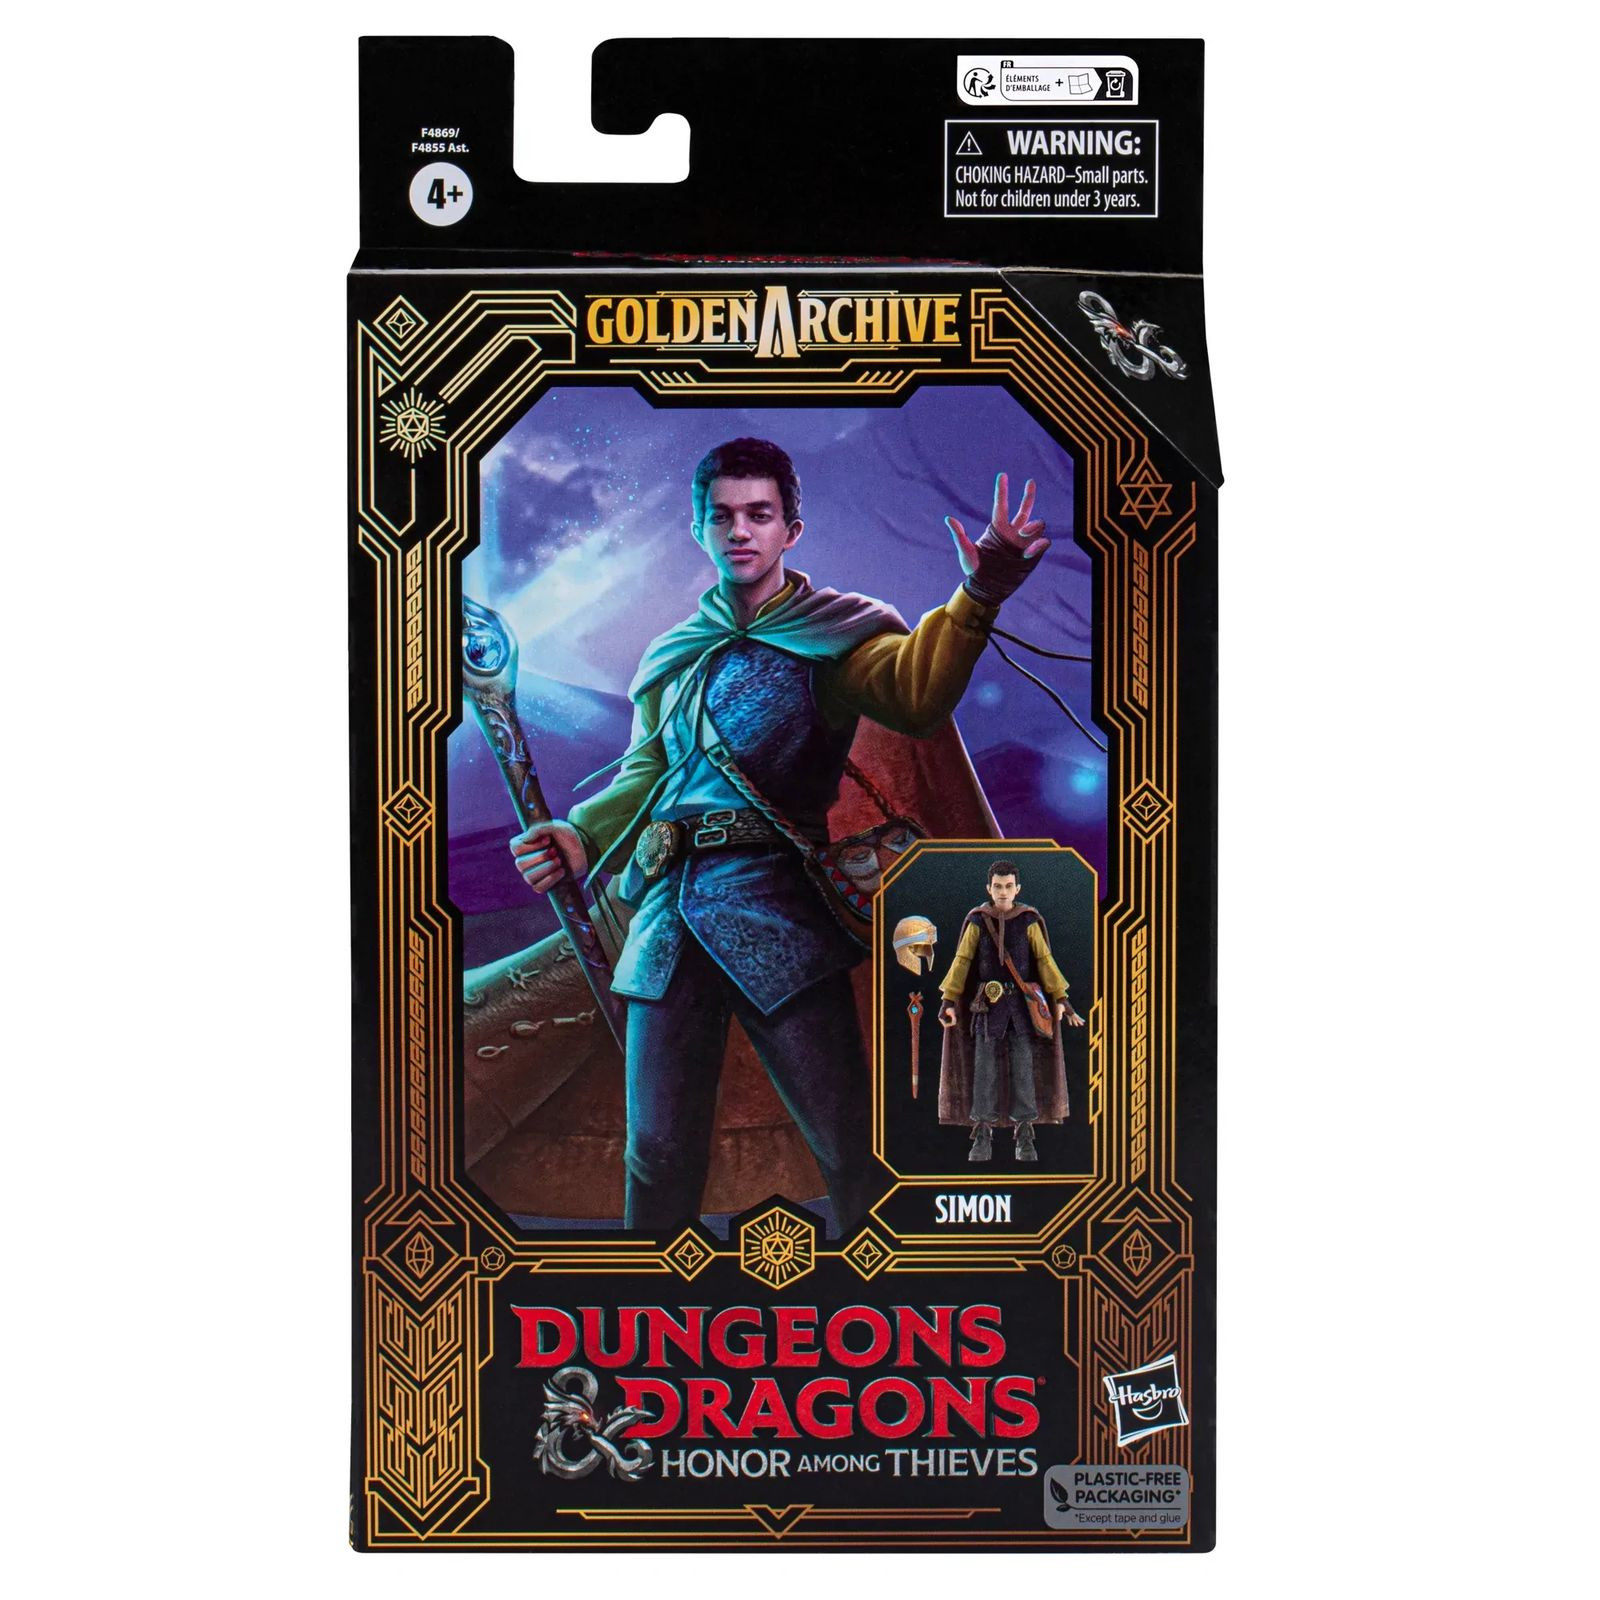 SIMON FIG 15 CM DUNGEON & DRAGONS HONOR AMONG THIEVES